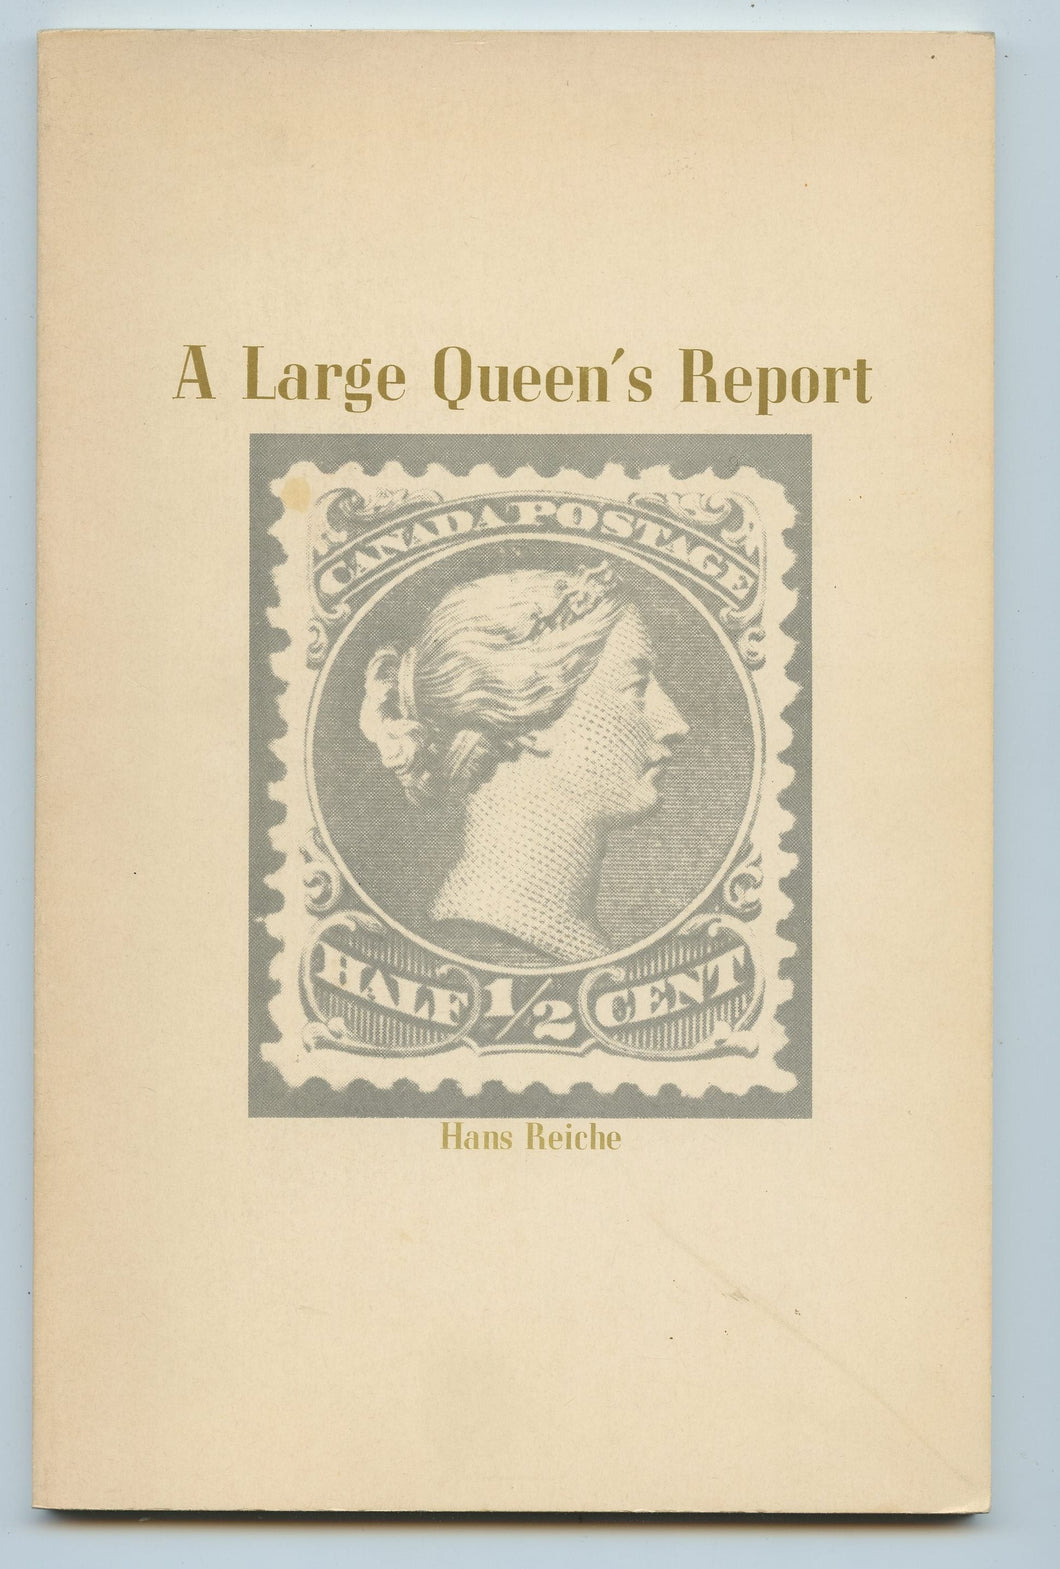 A Large Queen's Report